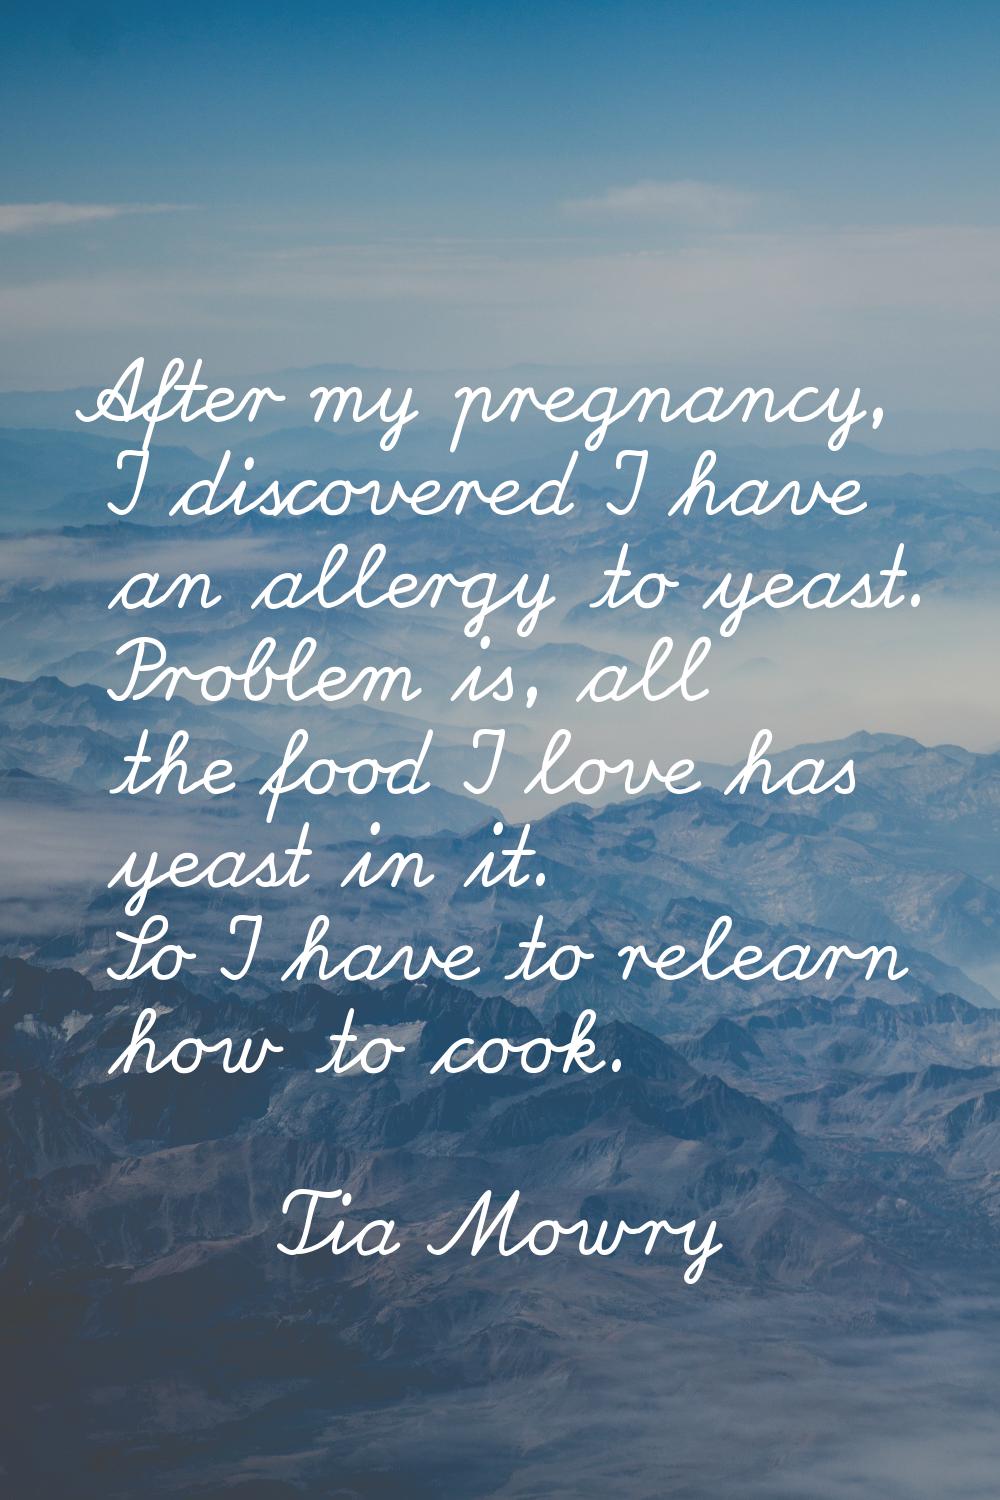 After my pregnancy, I discovered I have an allergy to yeast. Problem is, all the food I love has ye